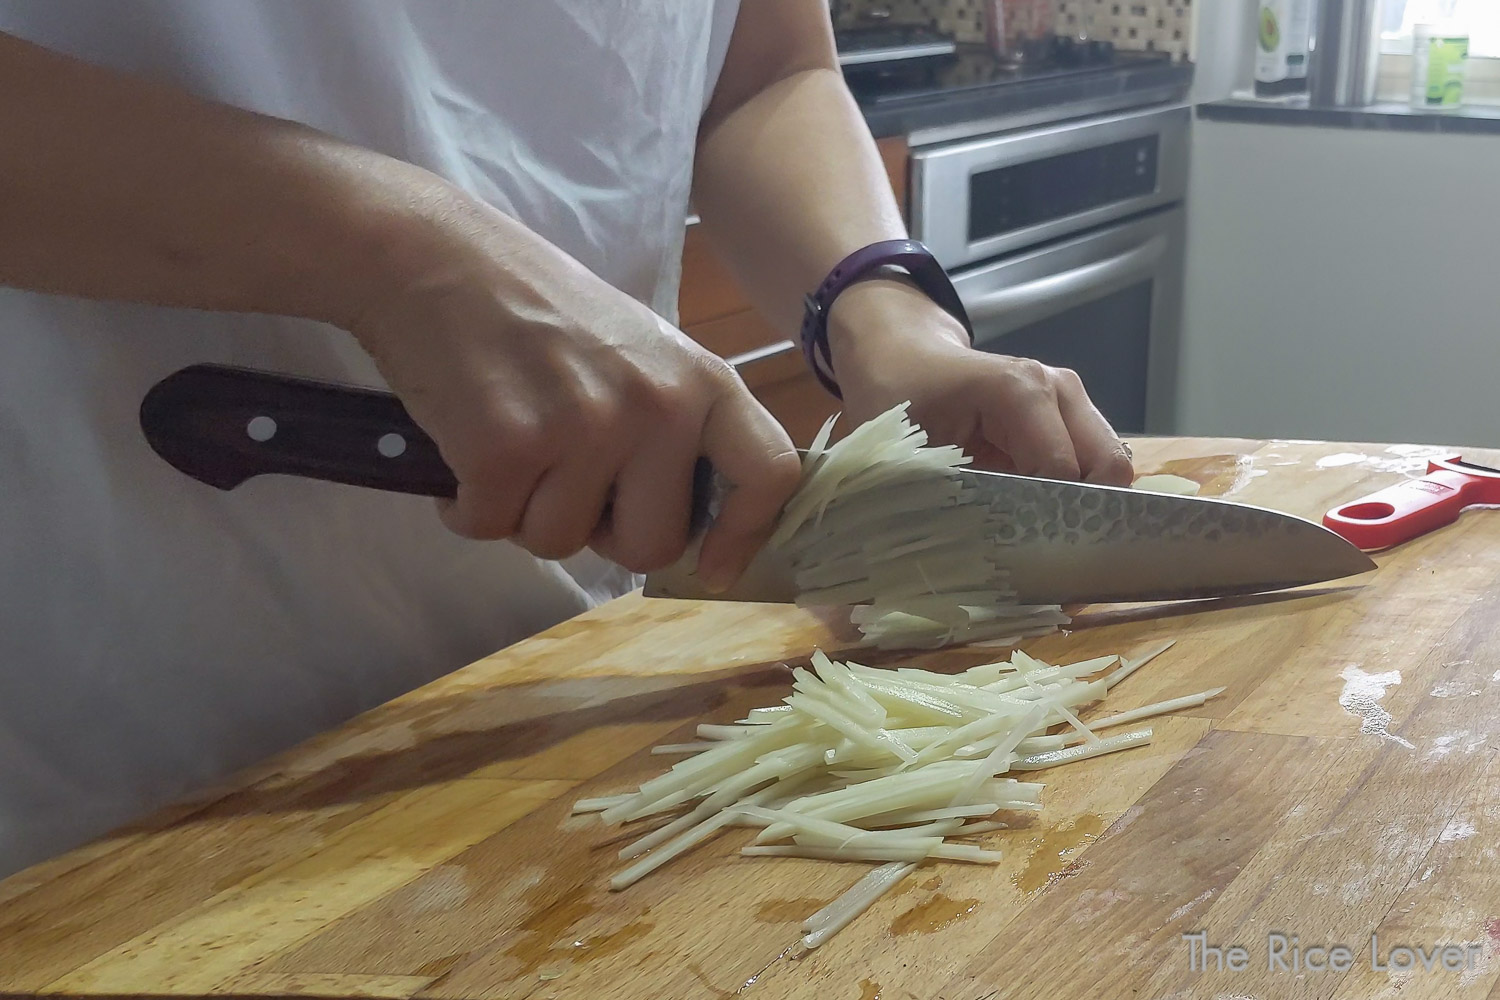 Pinch grip is the safest, most stable way to hold a knife, like for Chinese julienned potatoes